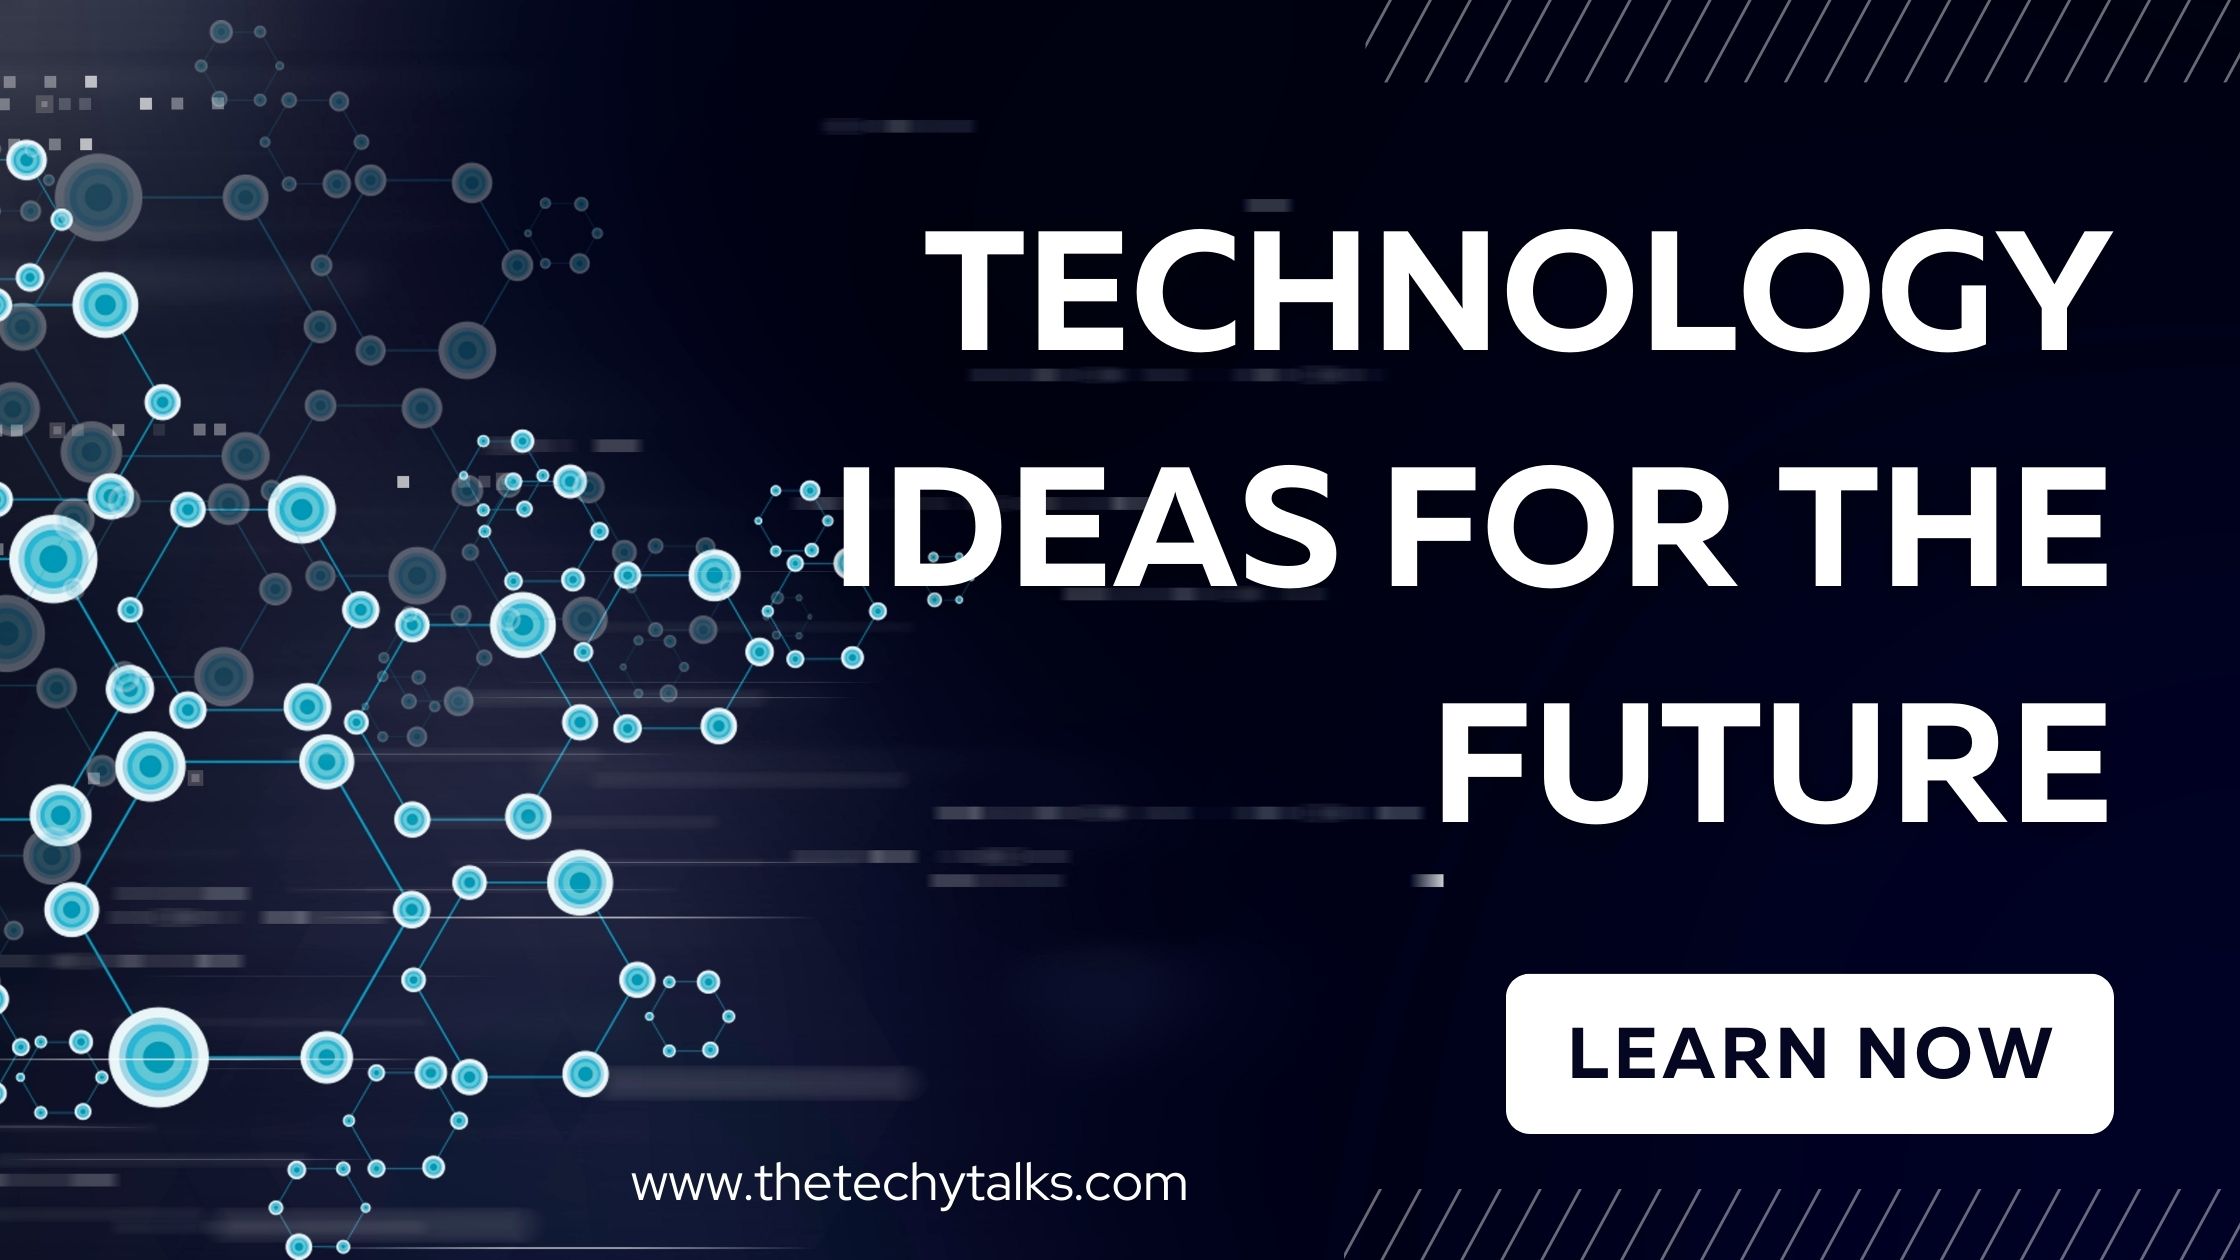 New Technology Ideas for the Future